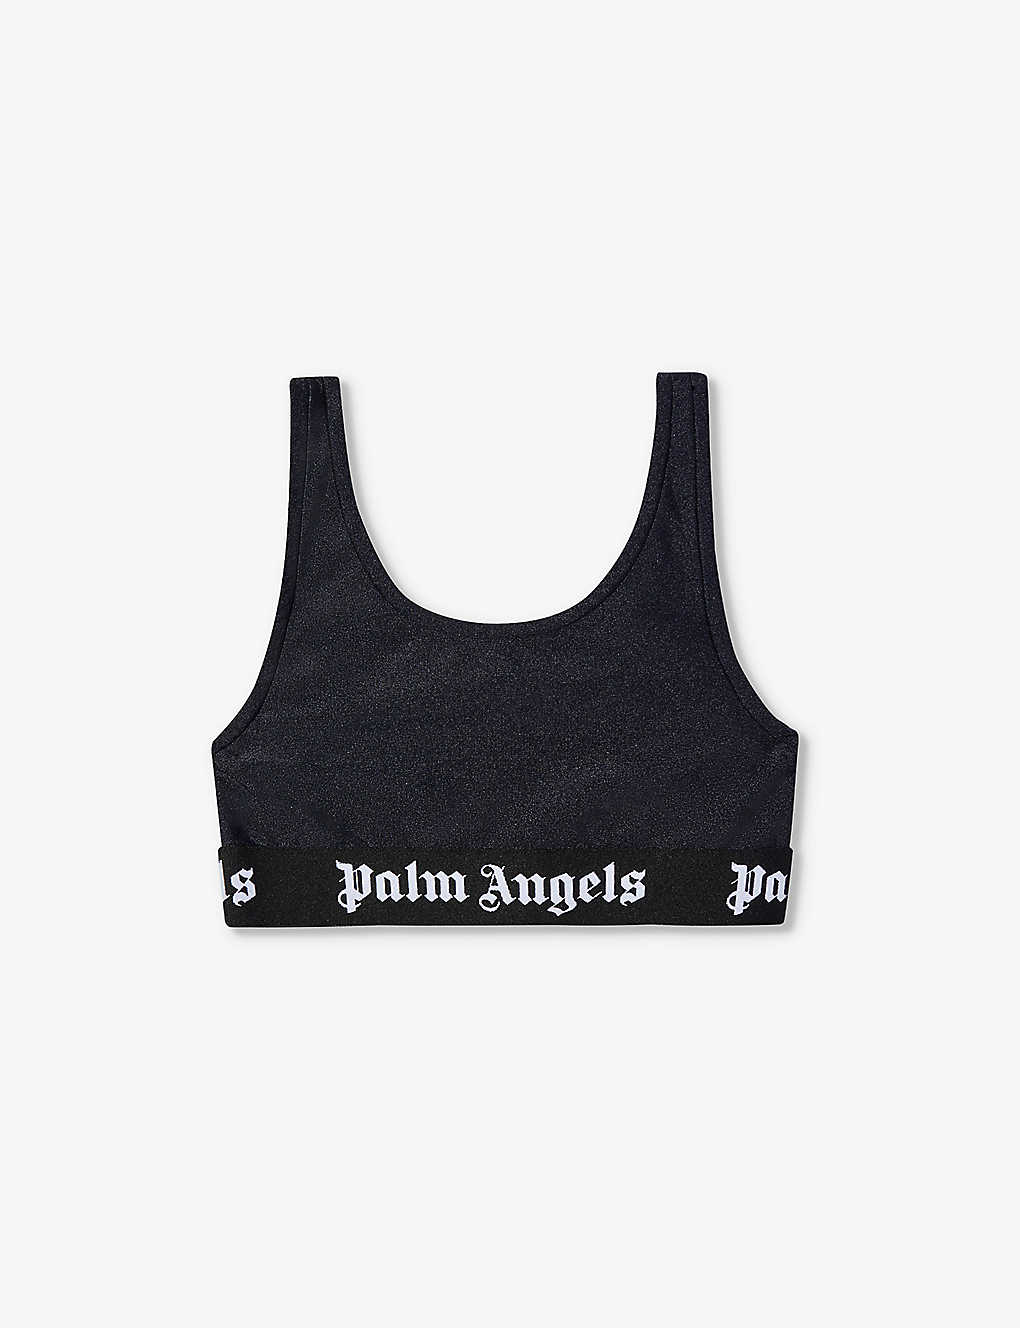 Palm Angels Girls Black Black Kids Scoop-neck Stretch-woven Top 8-12 Years